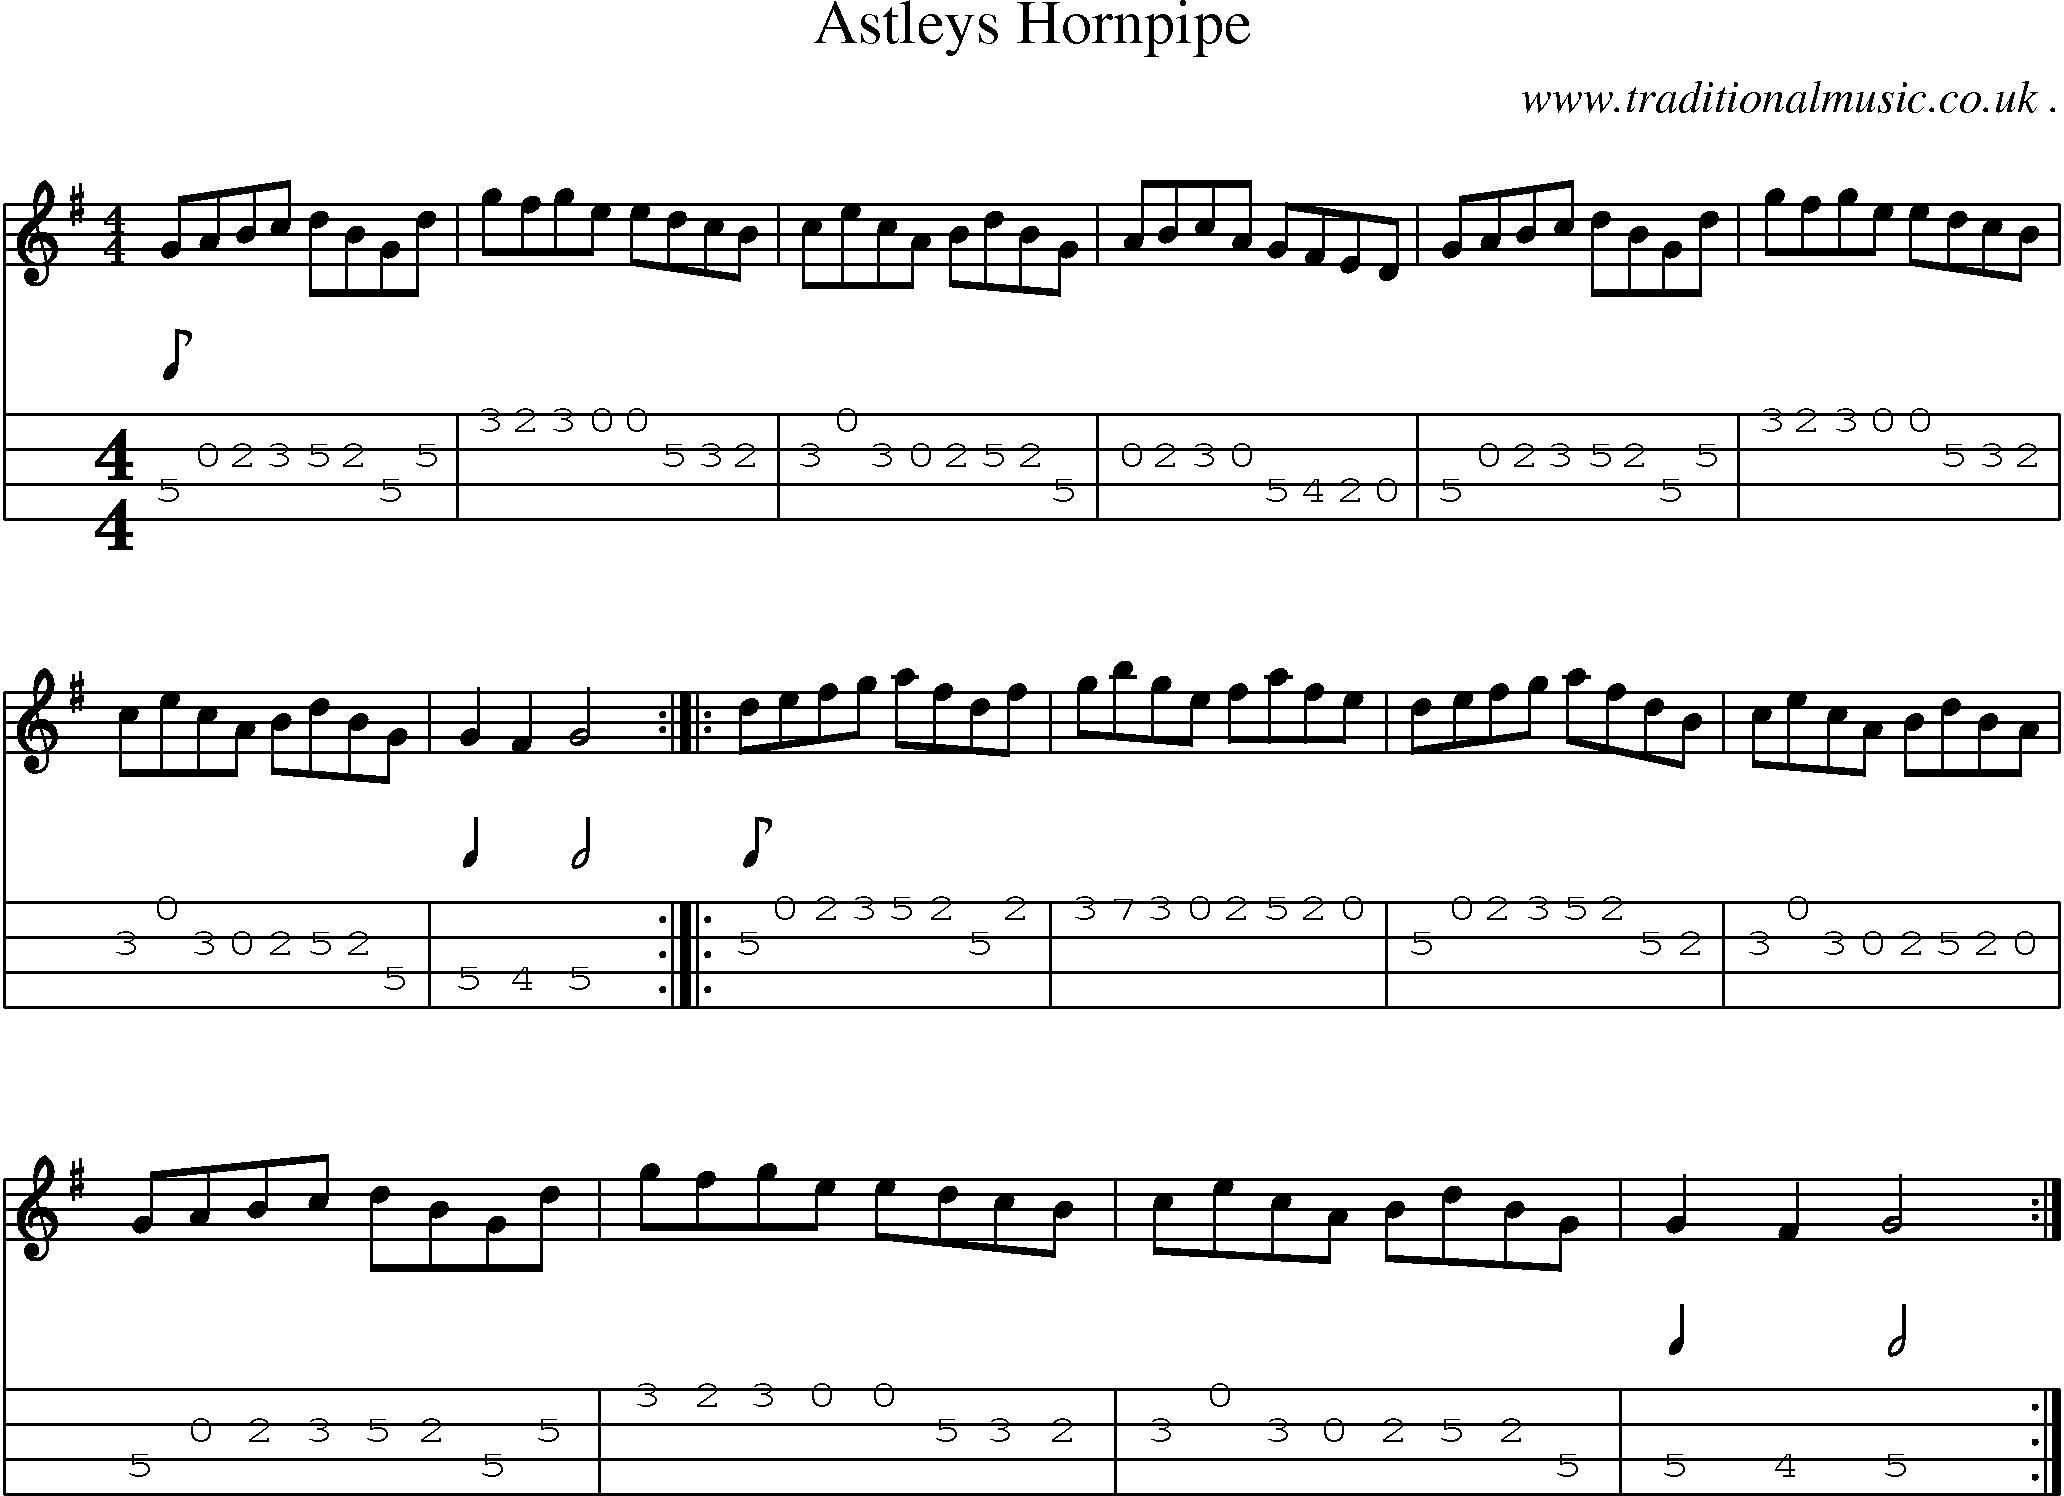 Sheet-Music and Mandolin Tabs for Astleys Hornpipe